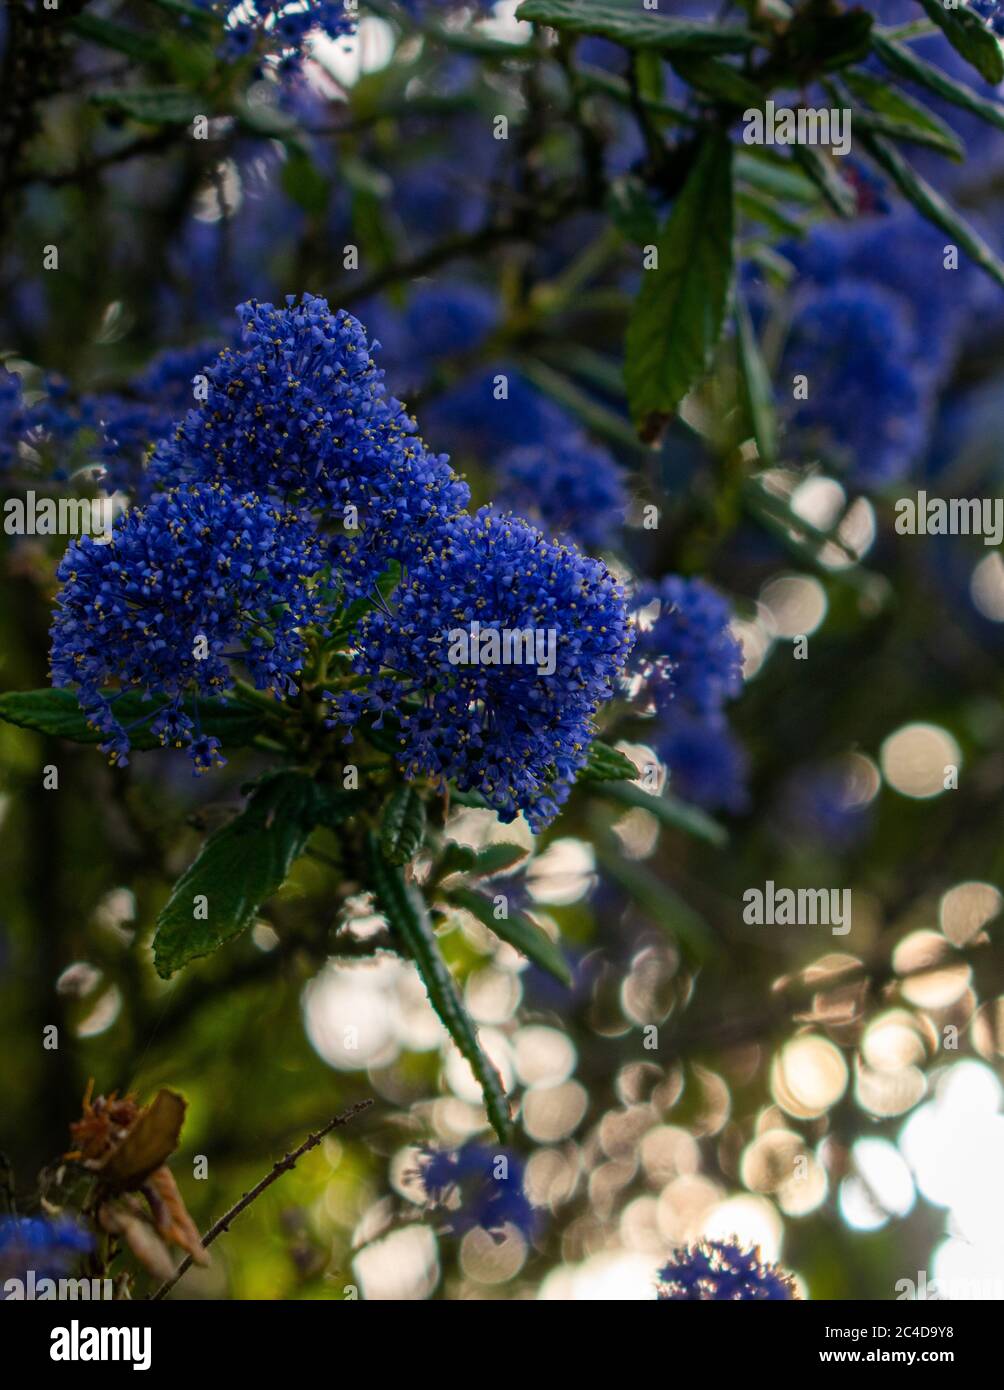 Vertical shot of a blue California Lilac flower with a blurred background Stock Photo